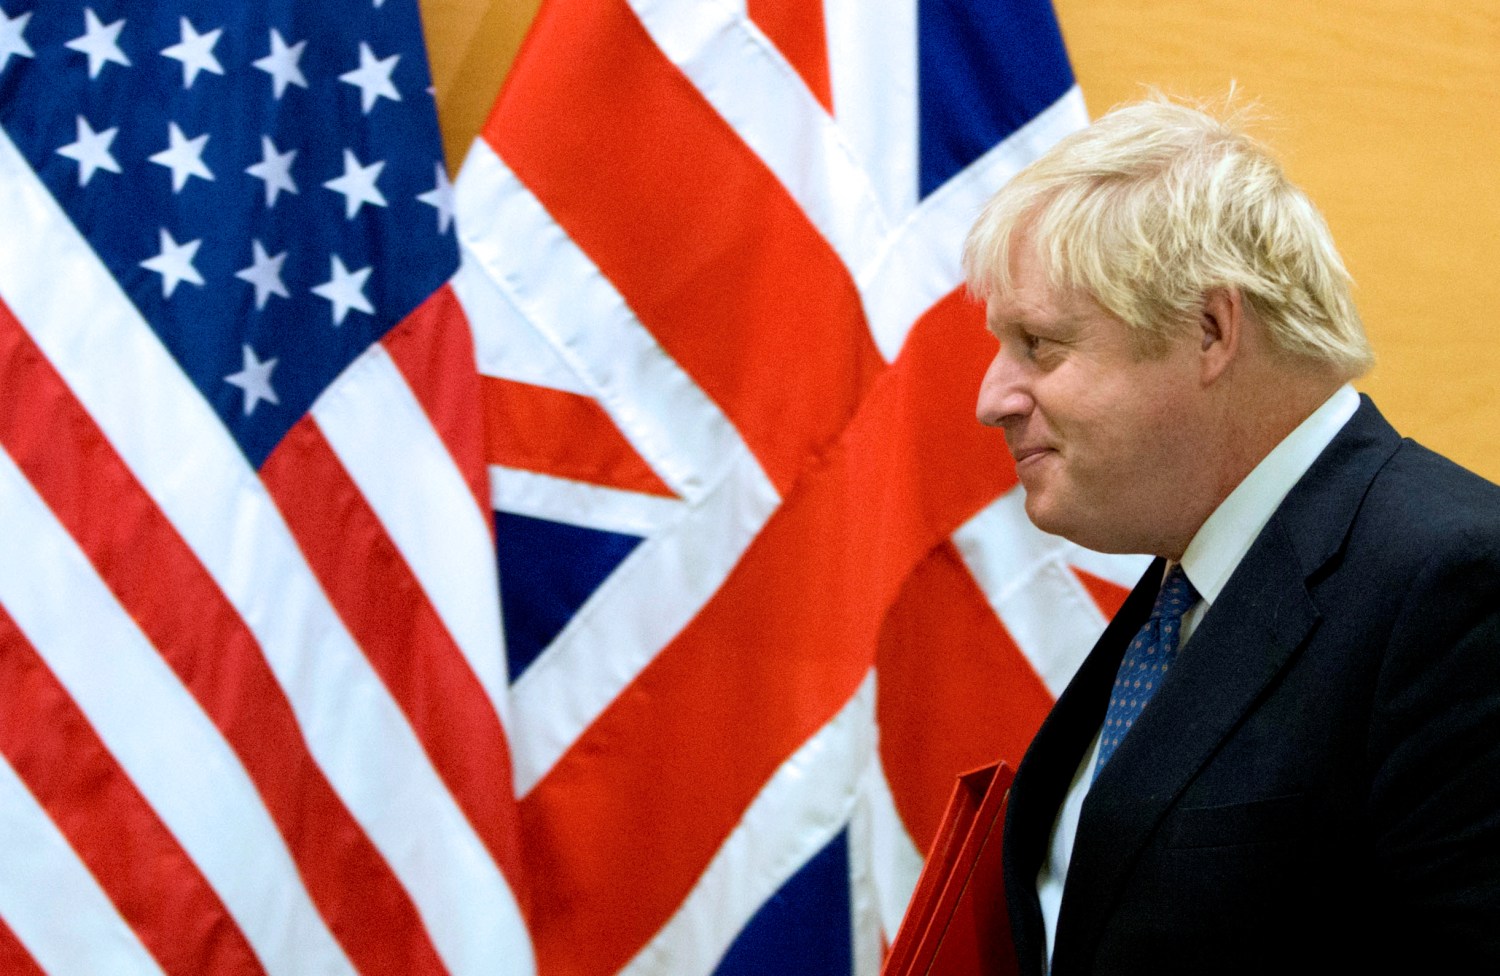 Britain's Foreign Secretary Boris Johnson arrives for a bilateral meeting with U.S. Secretary of State Rex Tillerson (unseen) during a NATO foreign ministers meeting at the Alliance headquarters in Brussels, Belgium, December 6, 2017. REUTERS/Virginia Mayo/Pool - RC1DEDF63850